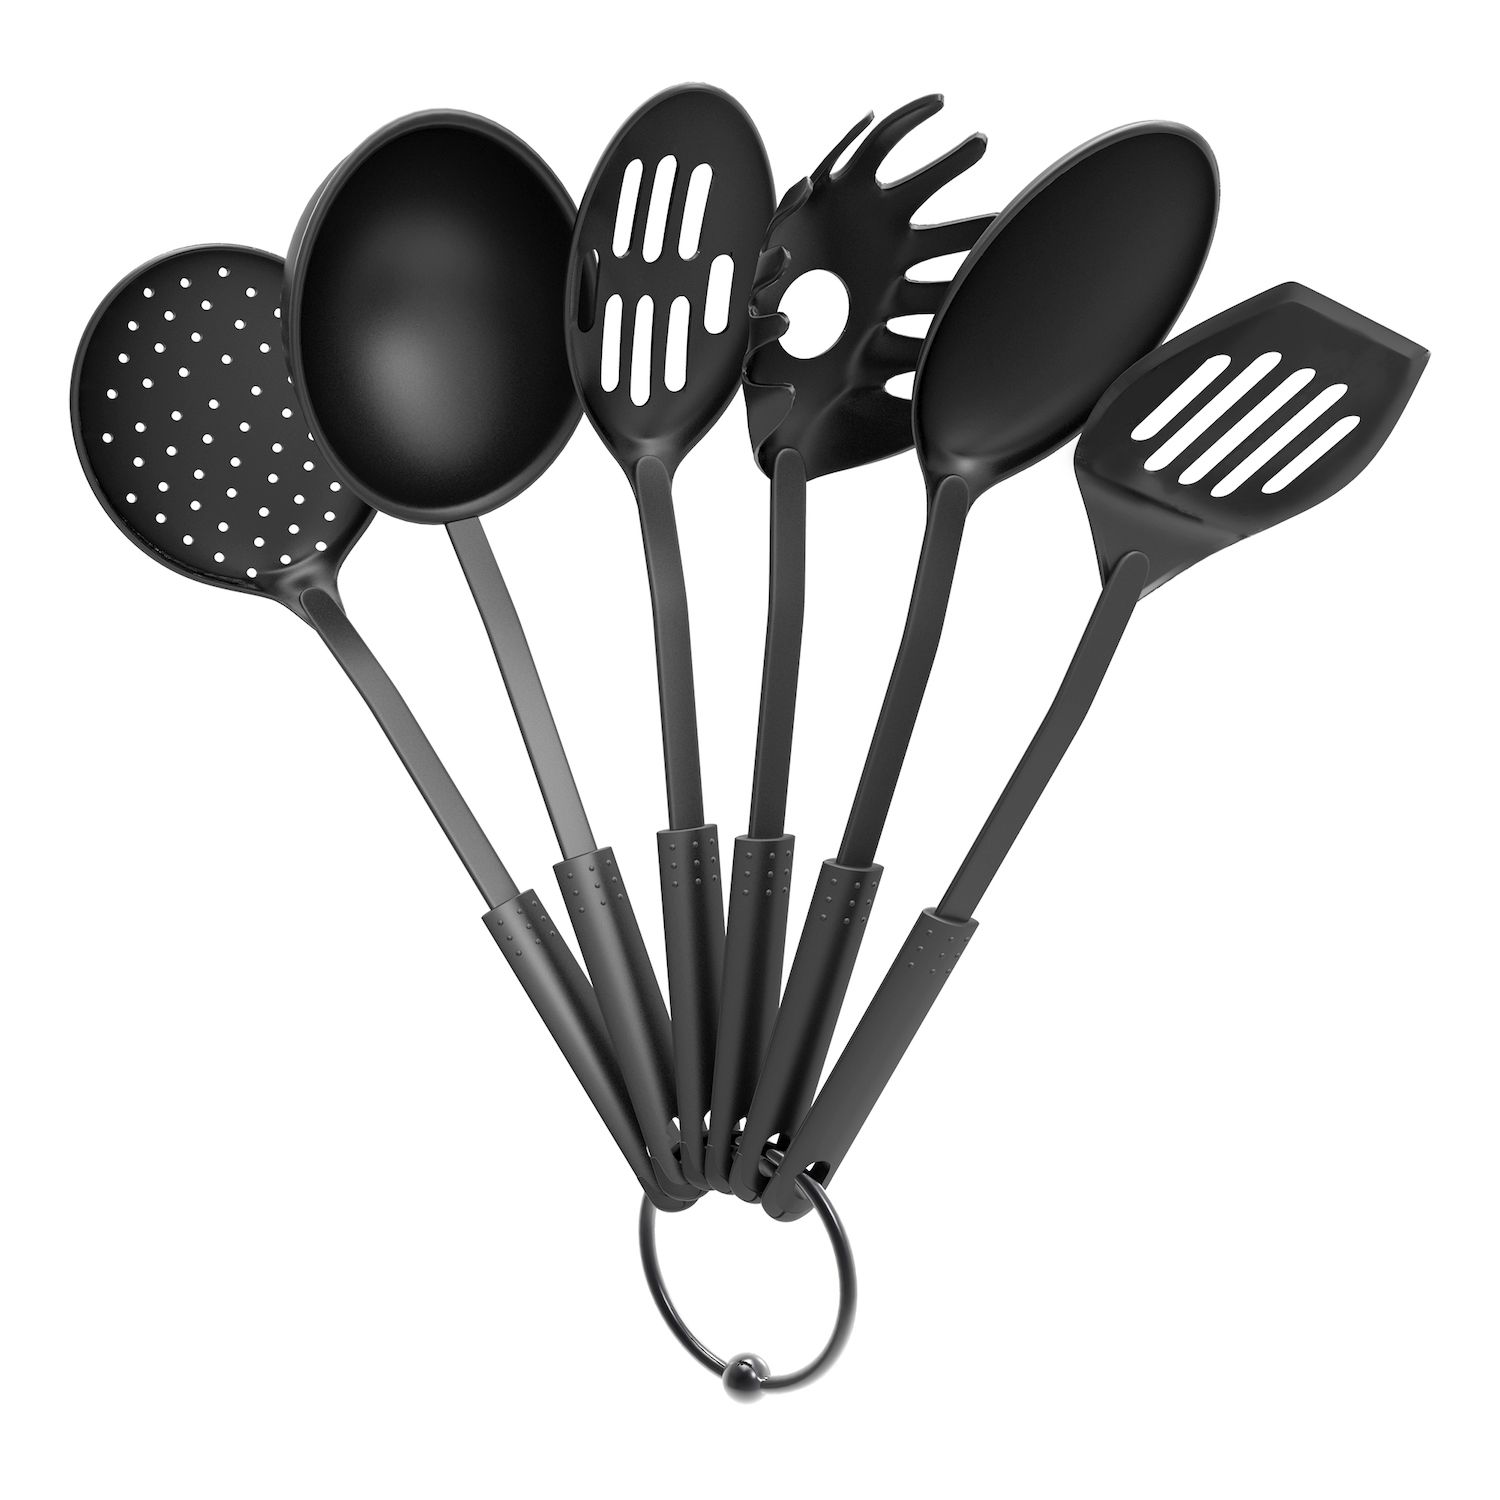 MegaChef Red Silicone Cooking Utensils (Set of 12)